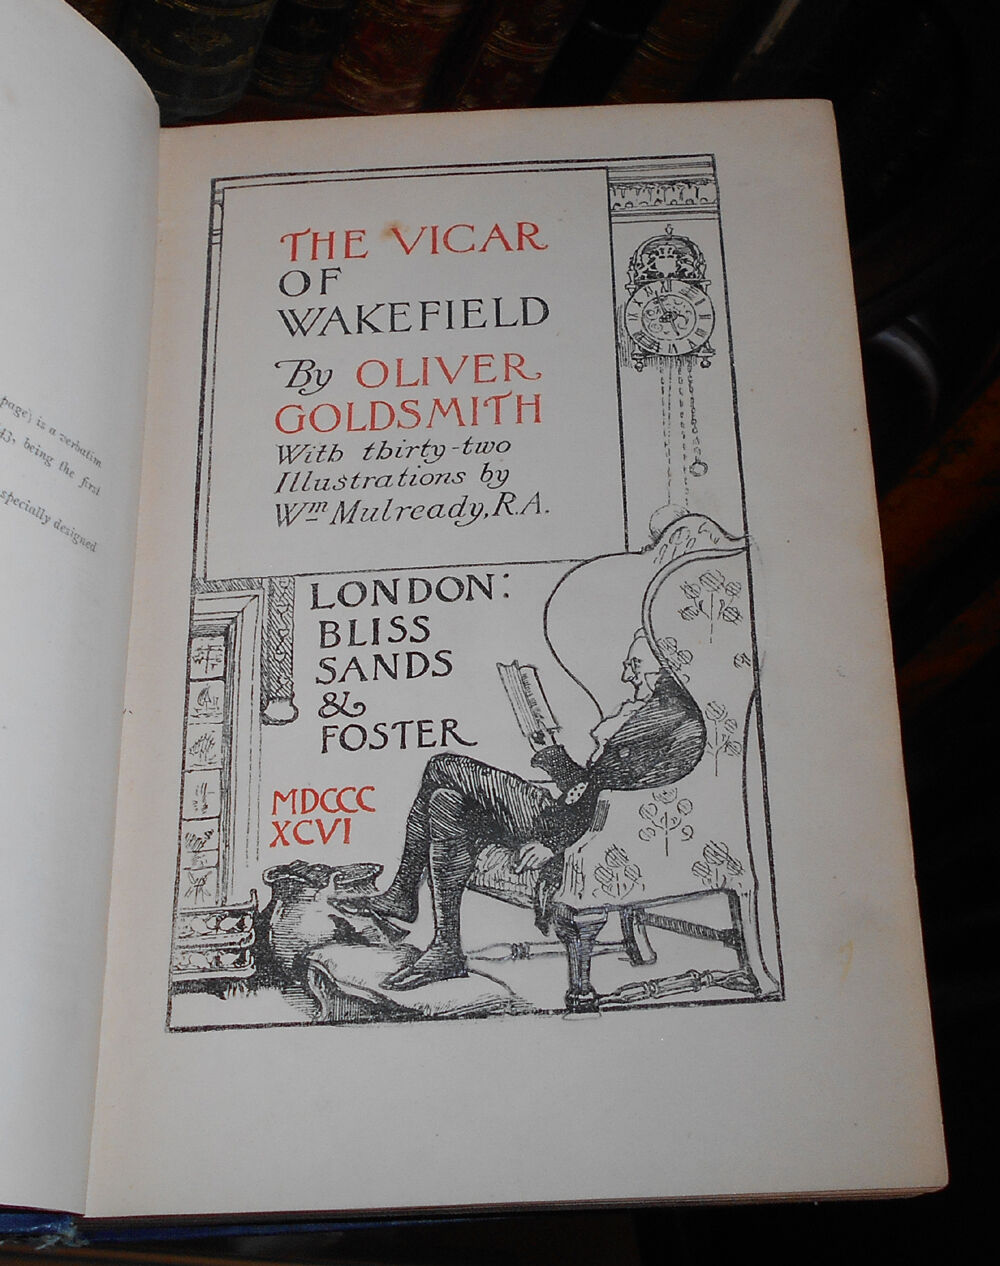 The Vicar of Wakefield - Oliver Goldsmith - 32 Illustrations by William Mulready